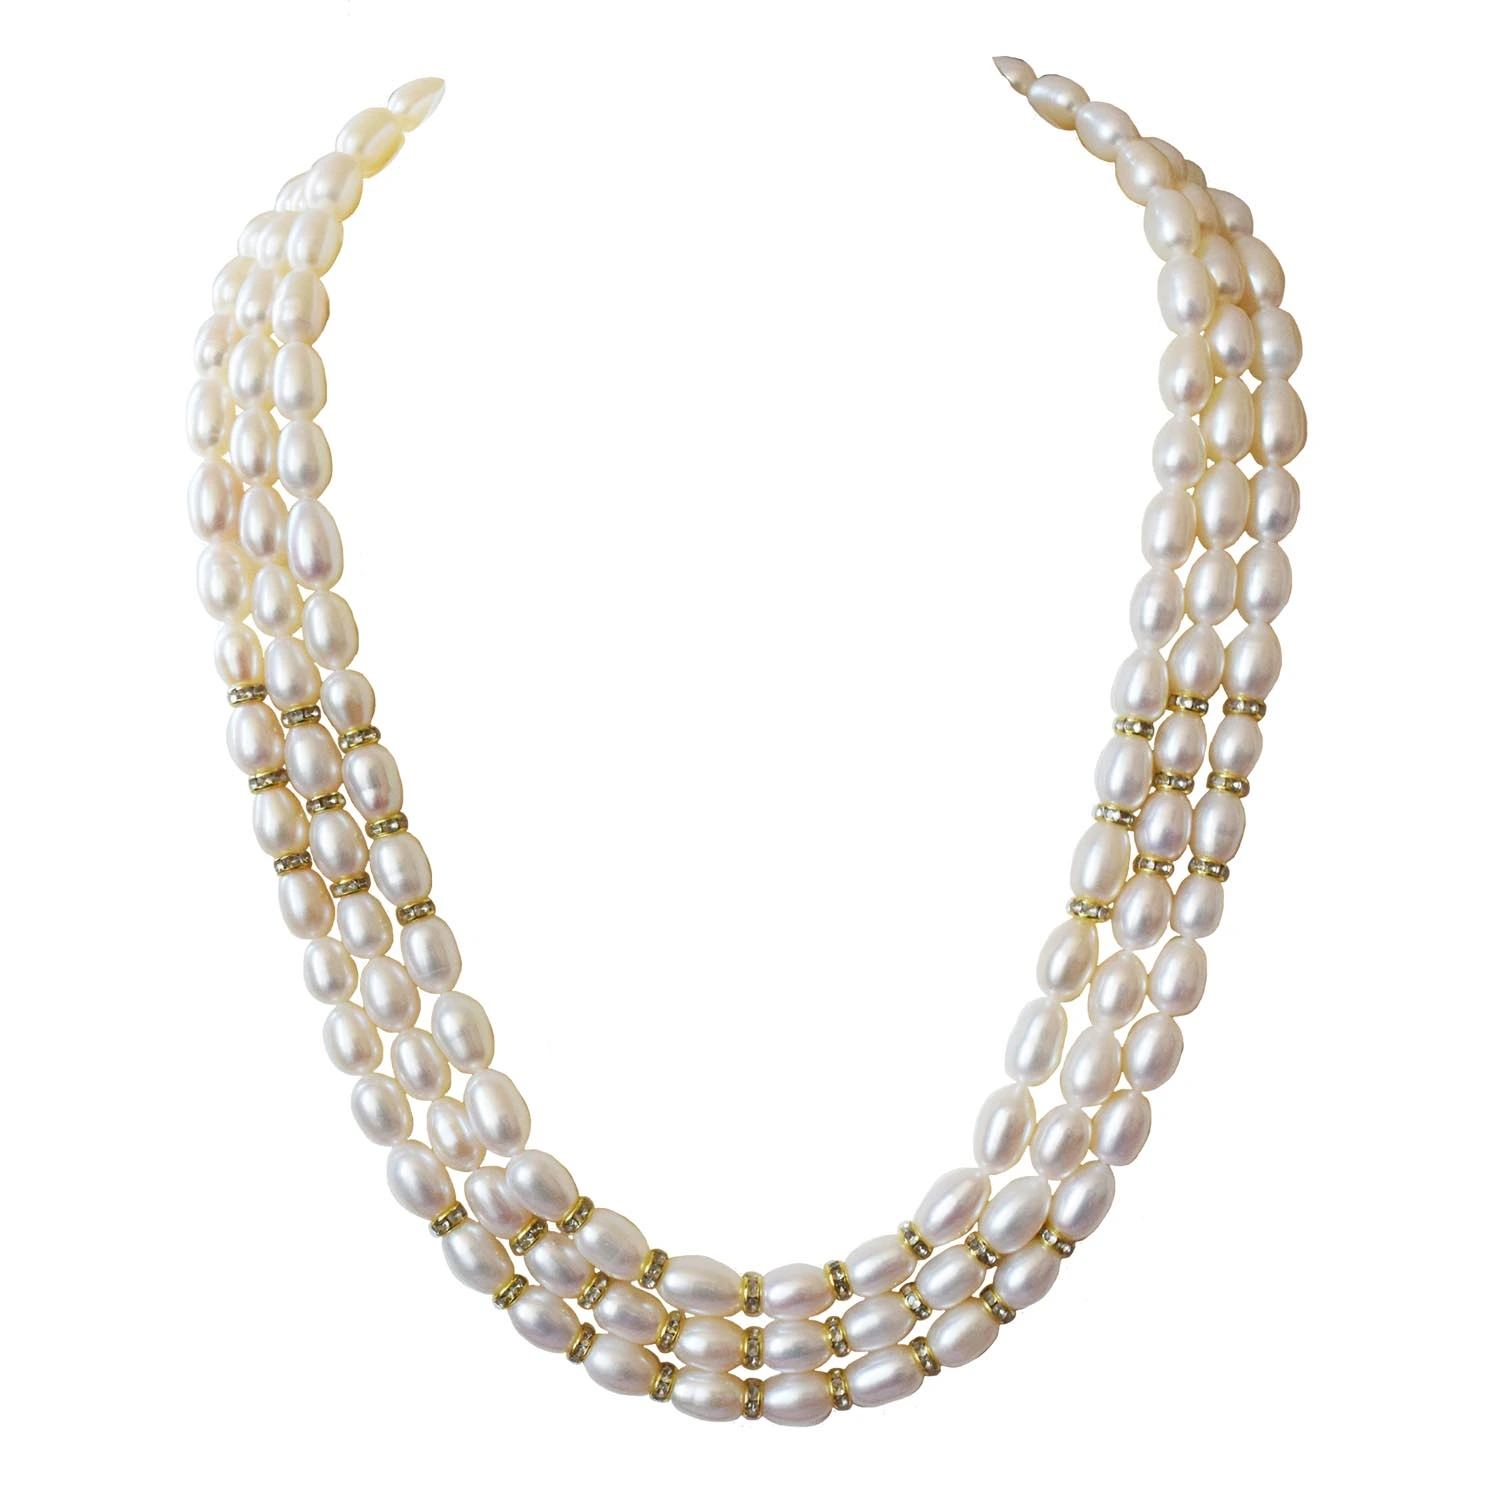 Majestic Cascade: Triple Layer Elongated Pearl and Stone Ring Necklace (SN1032)